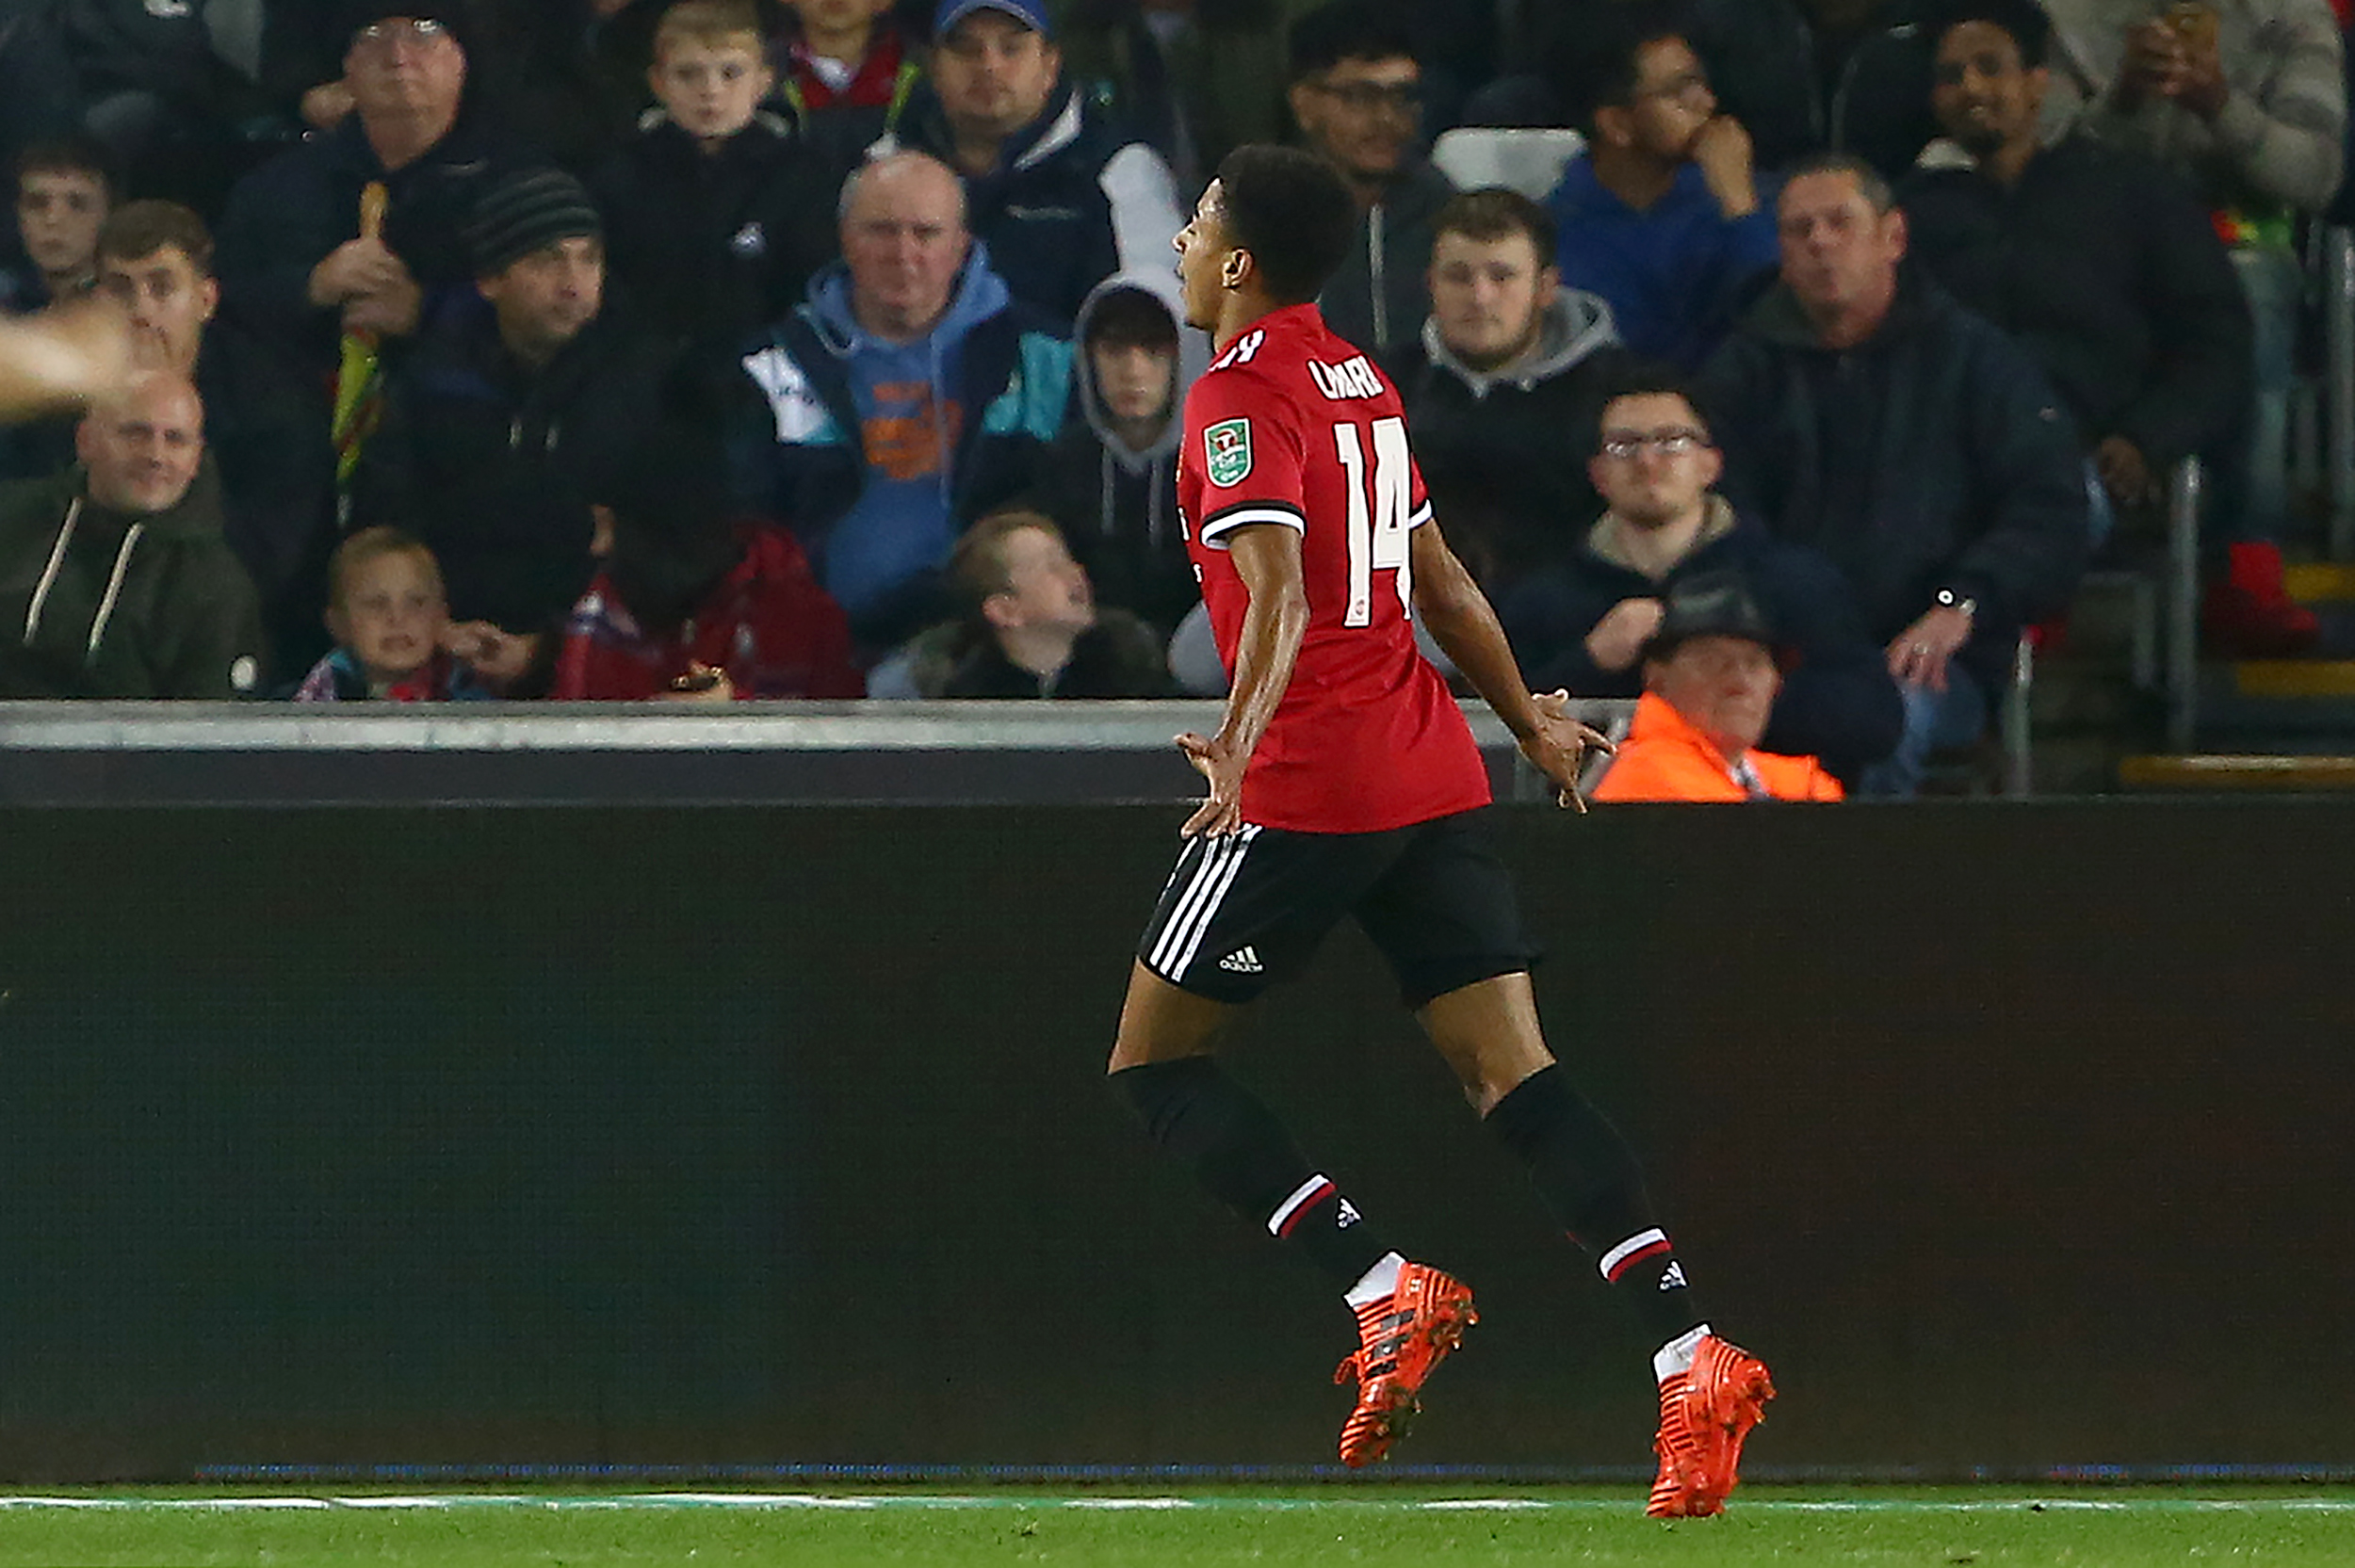 Manchester United's English midfielder Jesse Lingard celebrates scoring the opening goal during the English League Cup fourth round football match between Swansea City and Manchester United at The Liberty Stadium in Swansea, south Wales on October 24, 2017. / AFP PHOTO / Geoff CADDICK / RESTRICTED TO EDITORIAL USE. No use with unauthorized audio, video, data, fixture lists, club/league logos or 'live' services. Online in-match use limited to 75 images, no video emulation. No use in betting, games or single club/league/player publications.  /         (Photo credit should read GEOFF CADDICK/AFP/Getty Images)